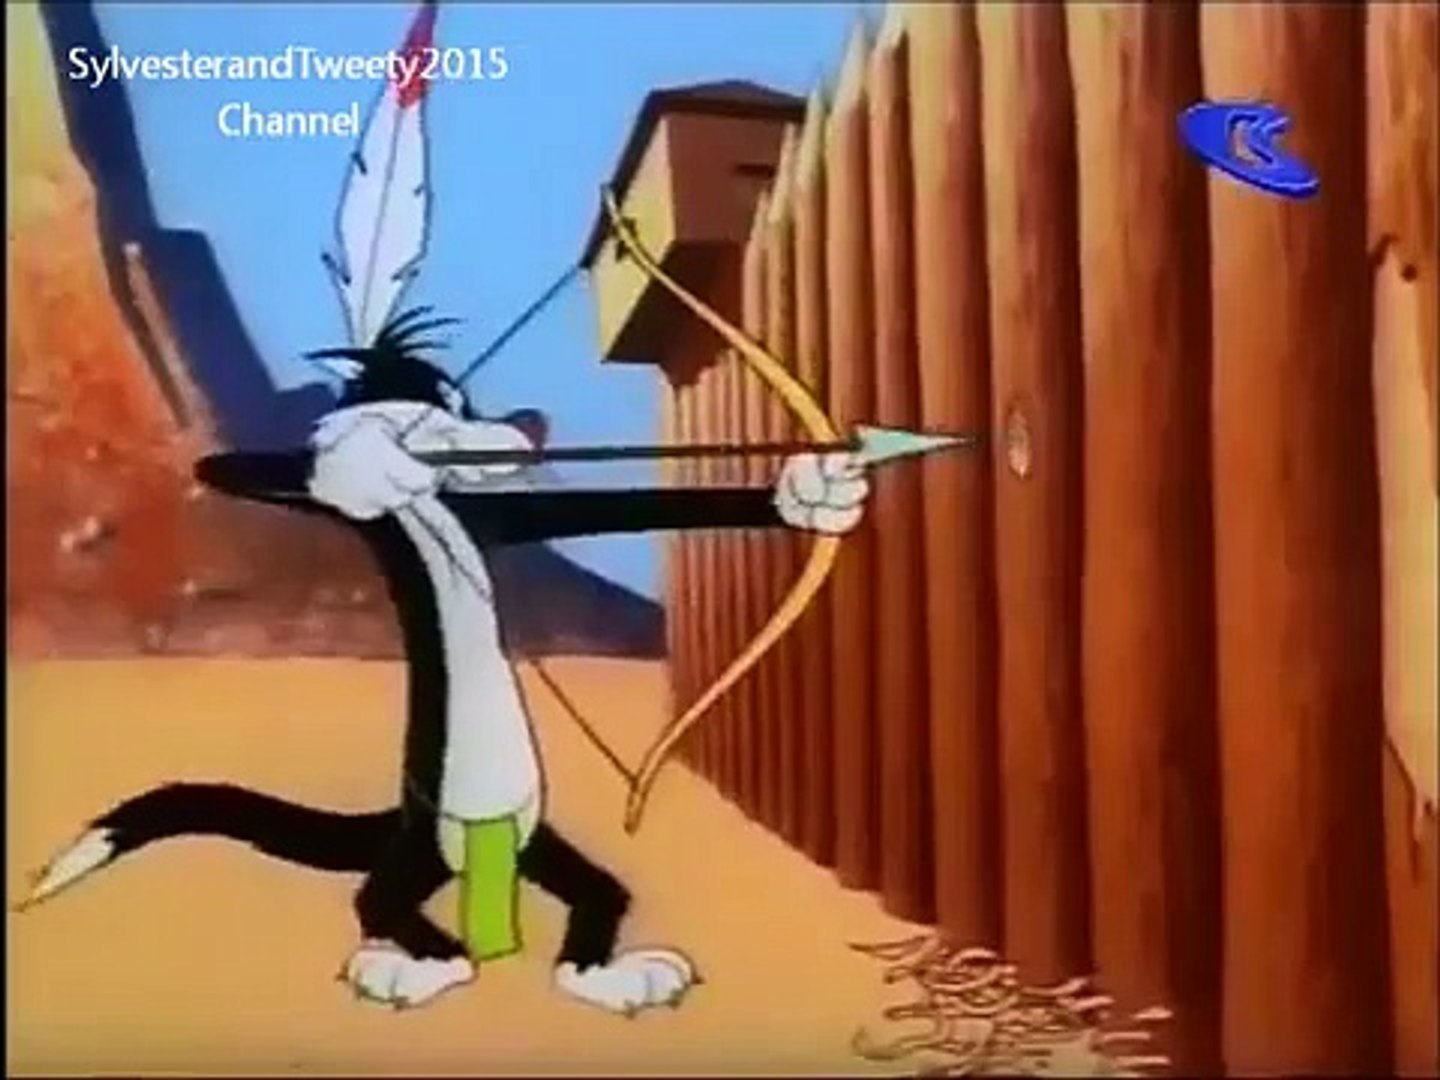 Sylvester and Tweety in TOM TOM TOMCAT Part 1 - Dailymotion Video